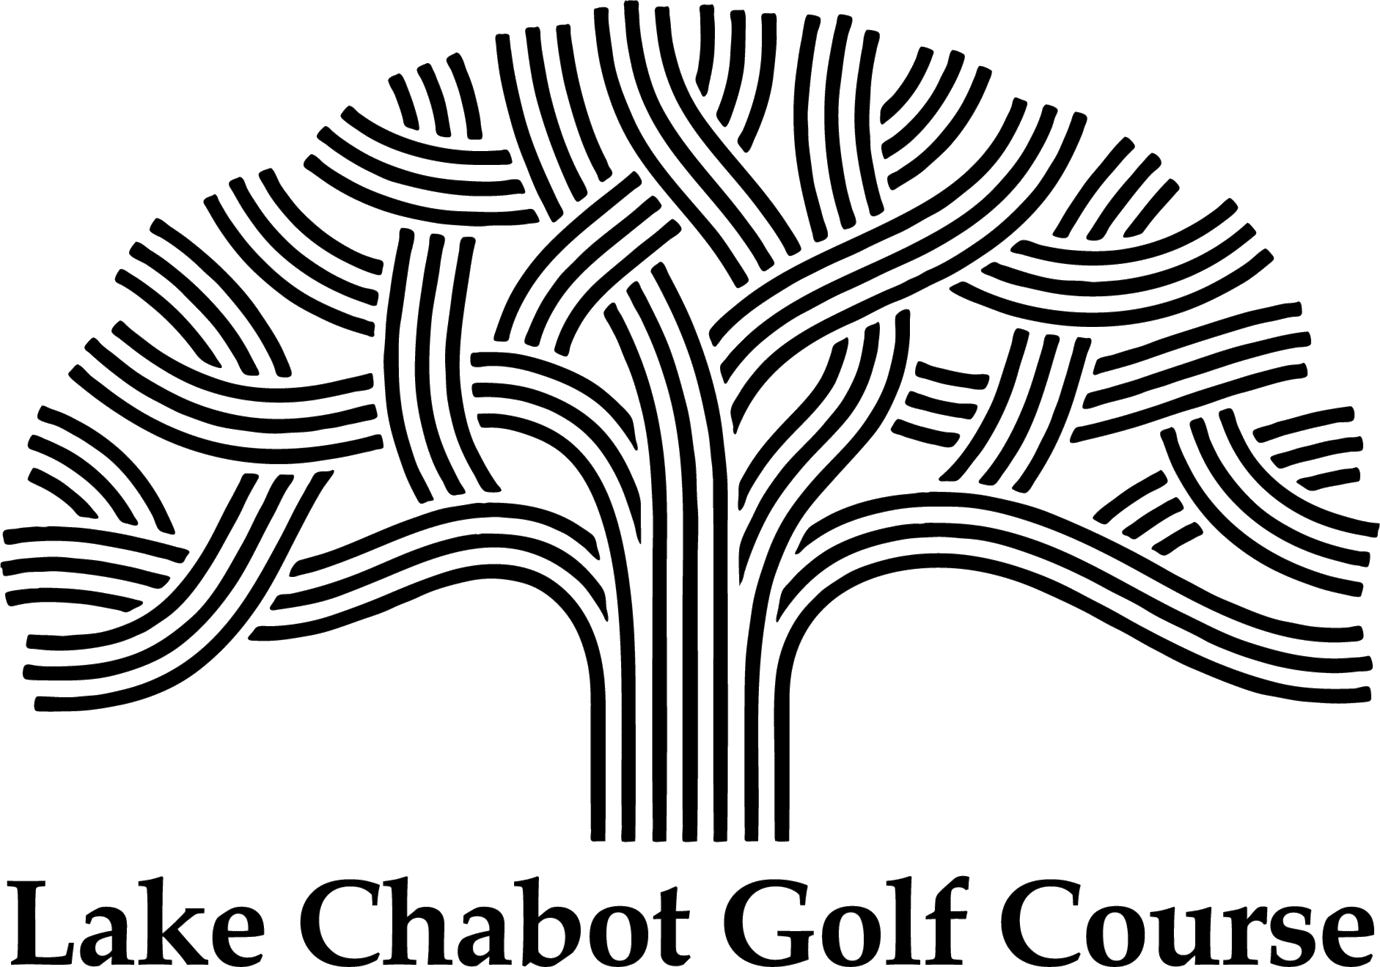 Lake Chabot Golf Course supports Holden High School